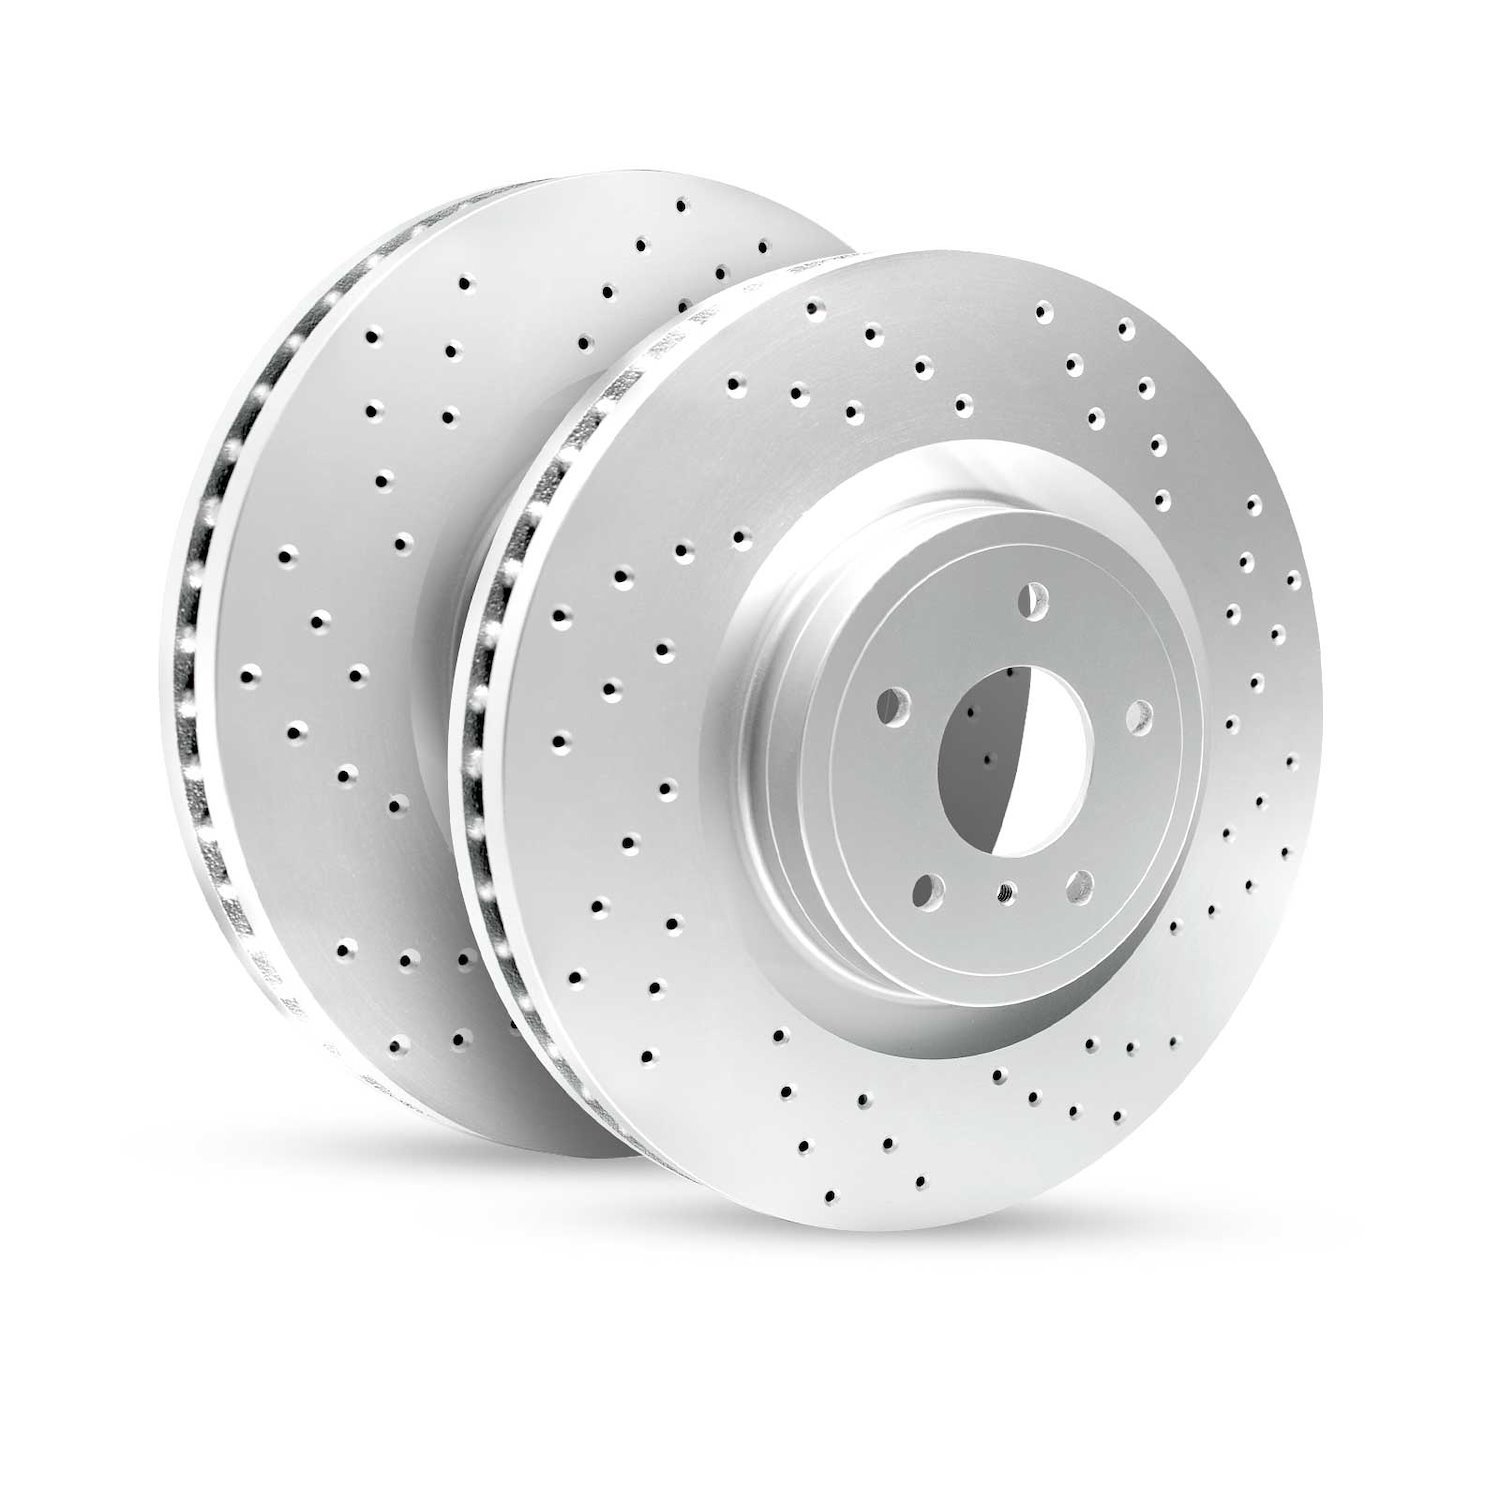 GEO-Carbon Drilled & Slotted Brake Rotor Set, Fits Select Fits Multiple Makes/Models, Position: Front